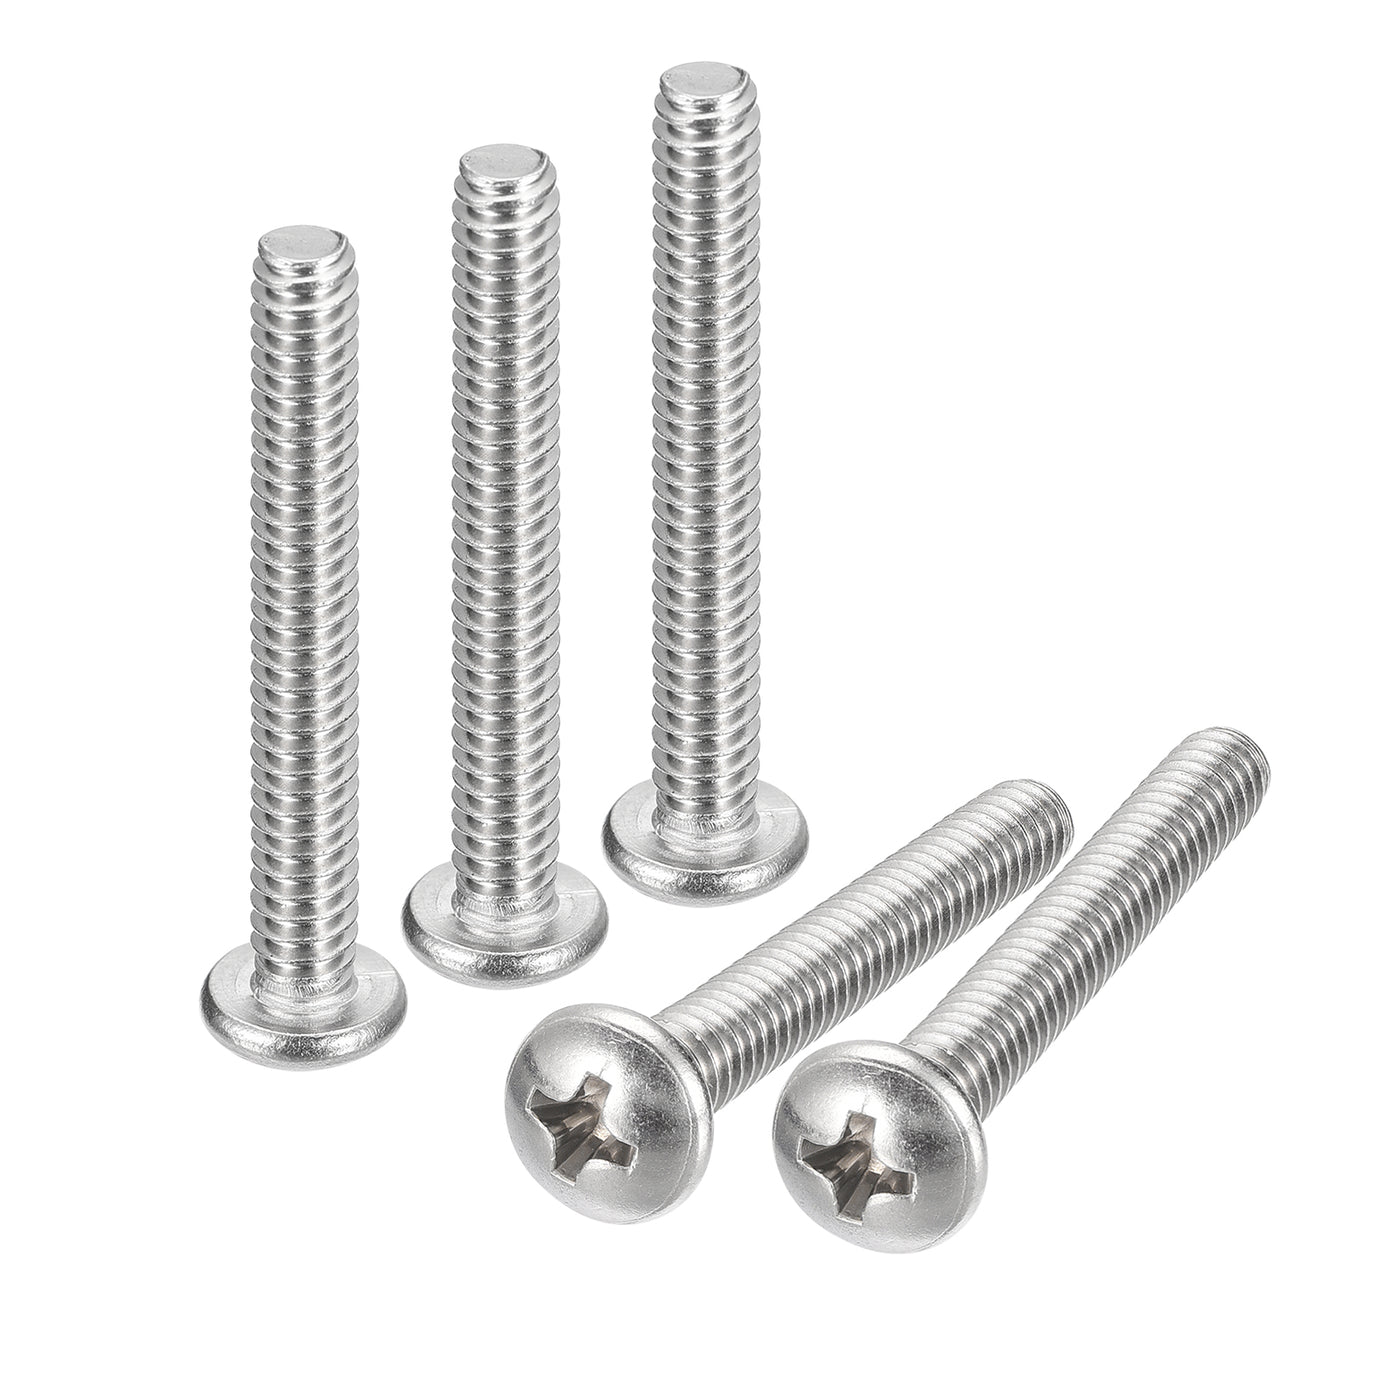 uxcell Uxcell #10-24x1-1/2" Pan Head Machine Screws, Stainless Steel 18-8 Screw, Pack of 10